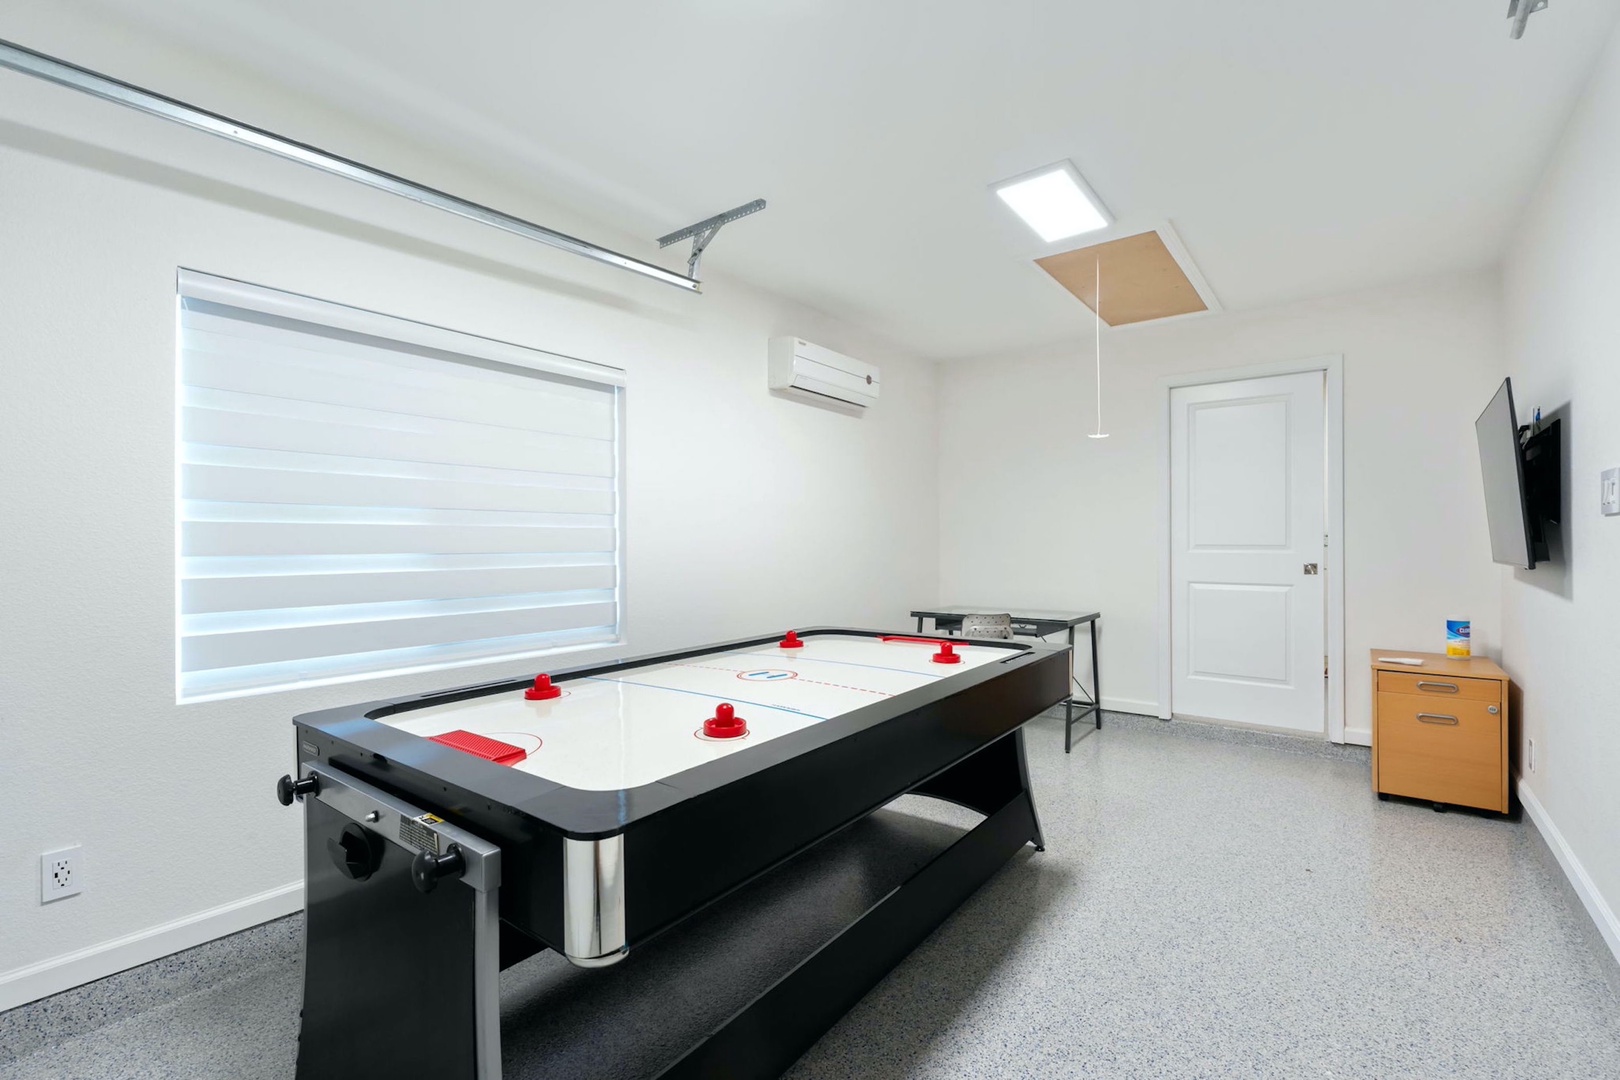 Get competitive with a round of air hockey in the garage game room